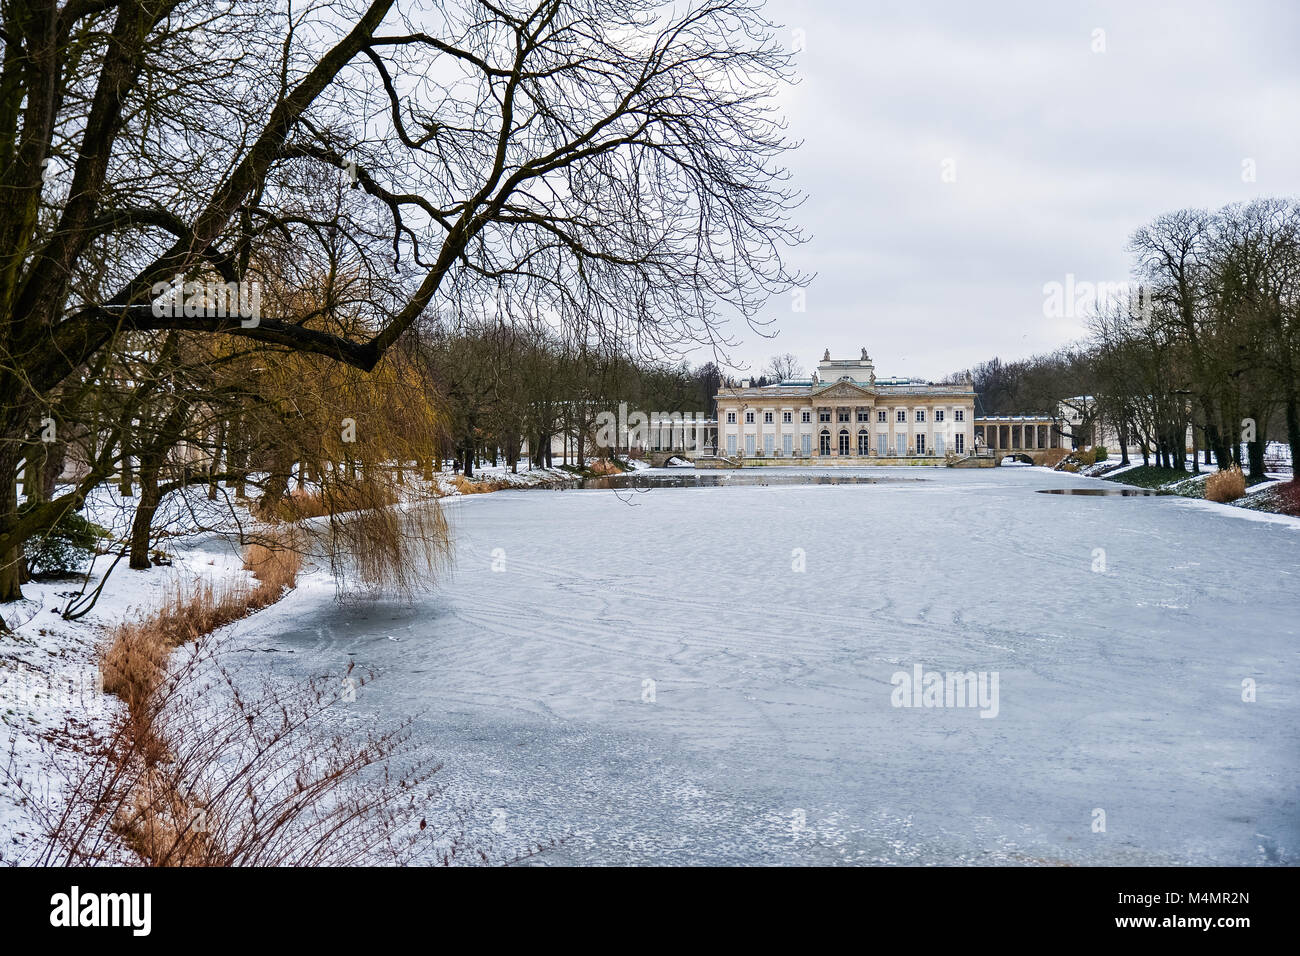 Winter in Warsaw, scenic view of the Palace on the Isle and the frozen pond Stock Photo